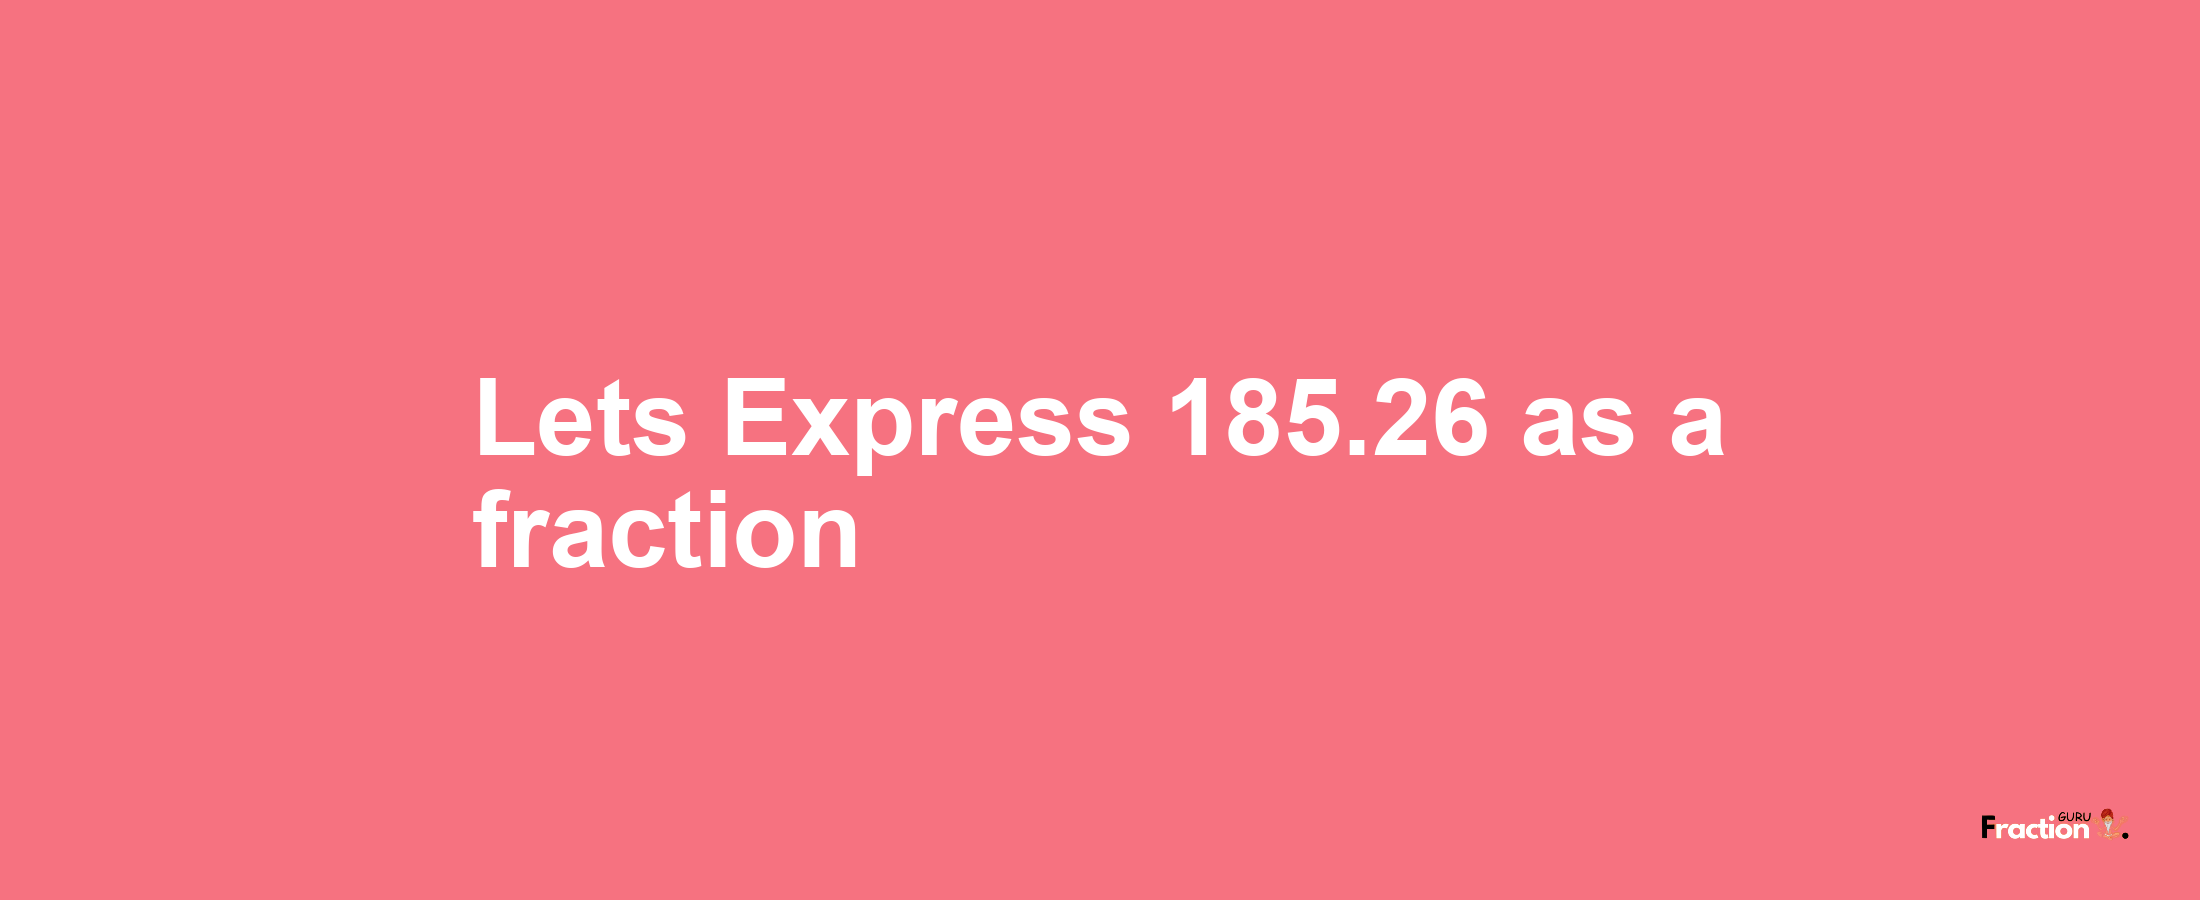 Lets Express 185.26 as afraction